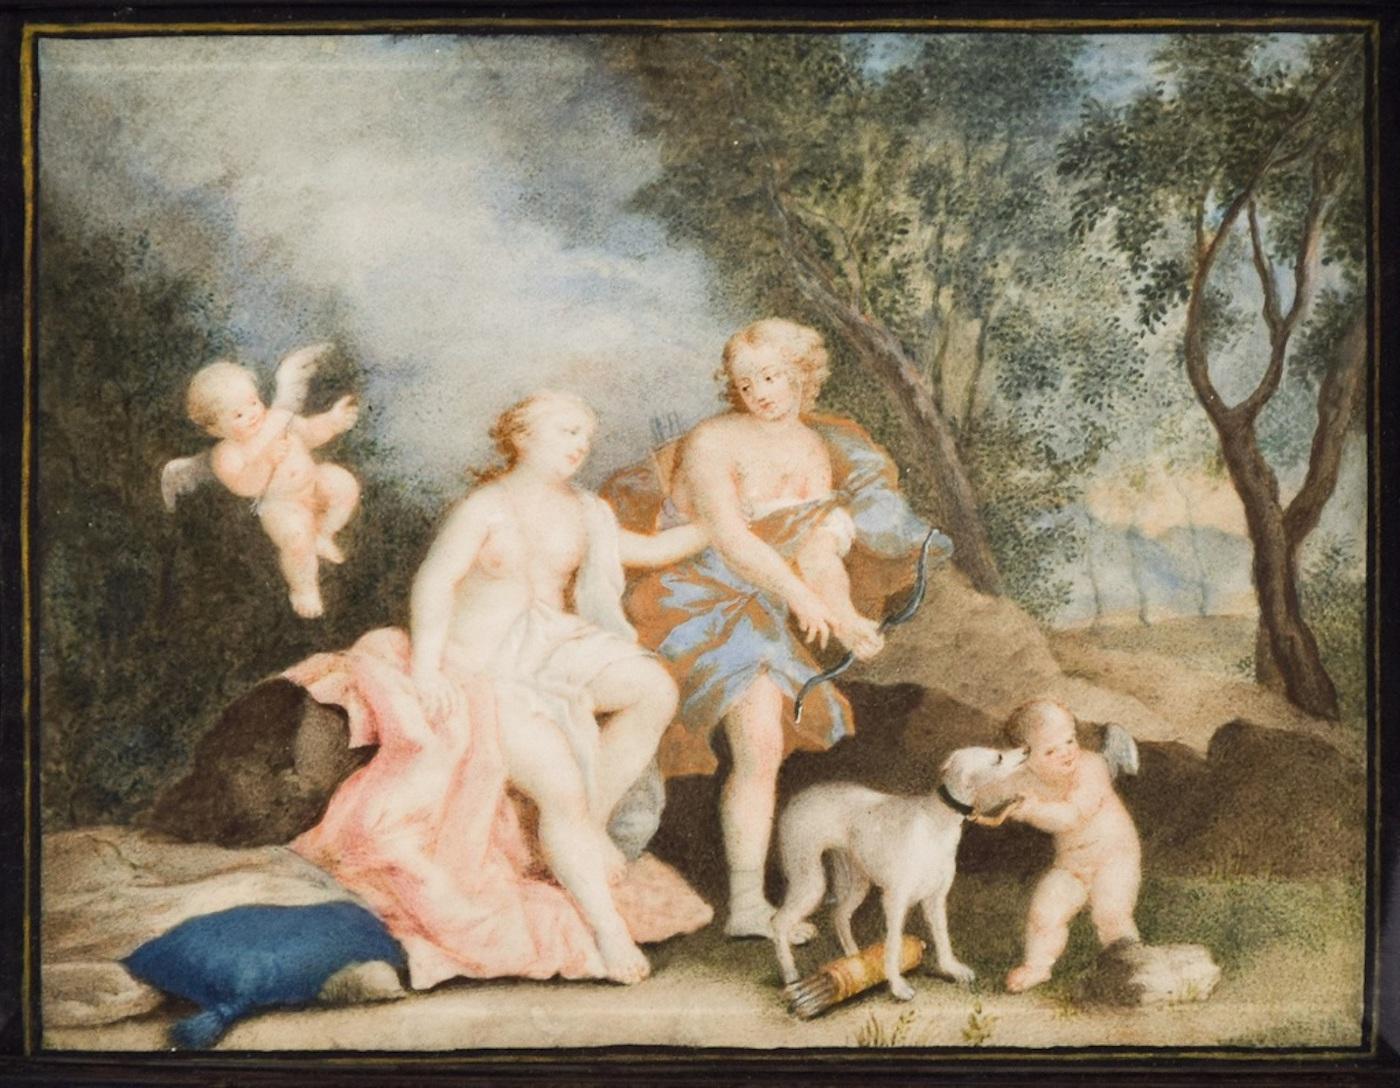 Unknown Figurative Painting - Mythological Scene - Oil on Board - 18th Century